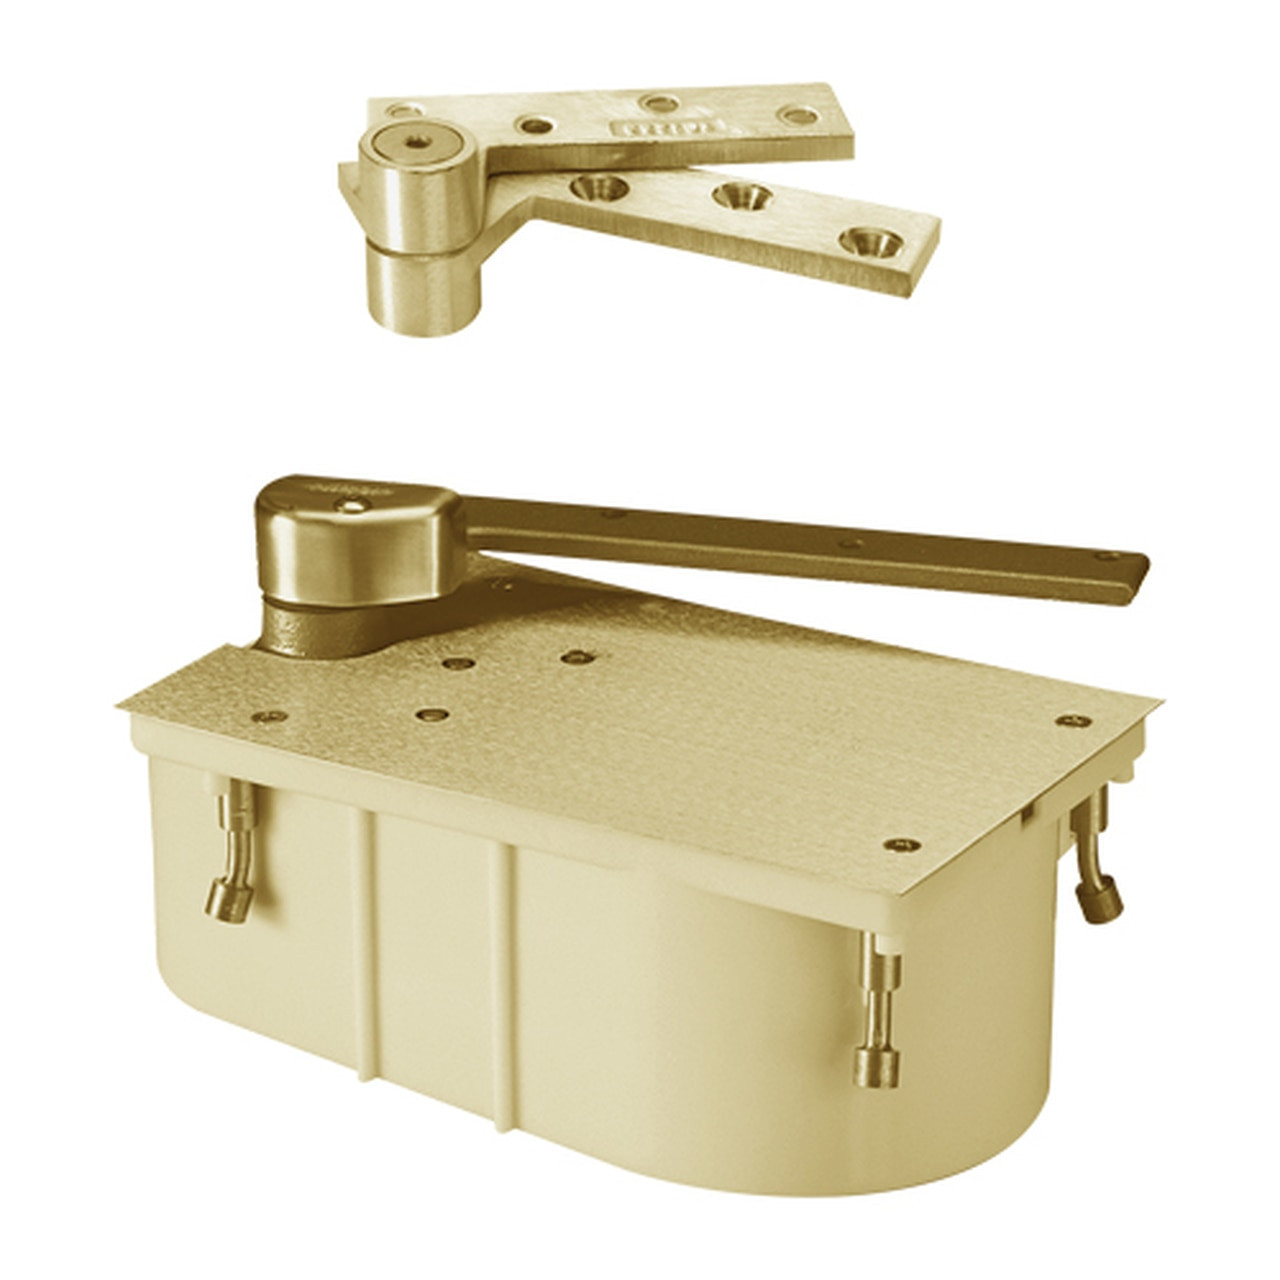 F27-95N-CWF-RH-606 Rixson 27 Series Fire Rated Heavy Duty 3/4" Offset Hung Floor Closer in Satin Brass Finish